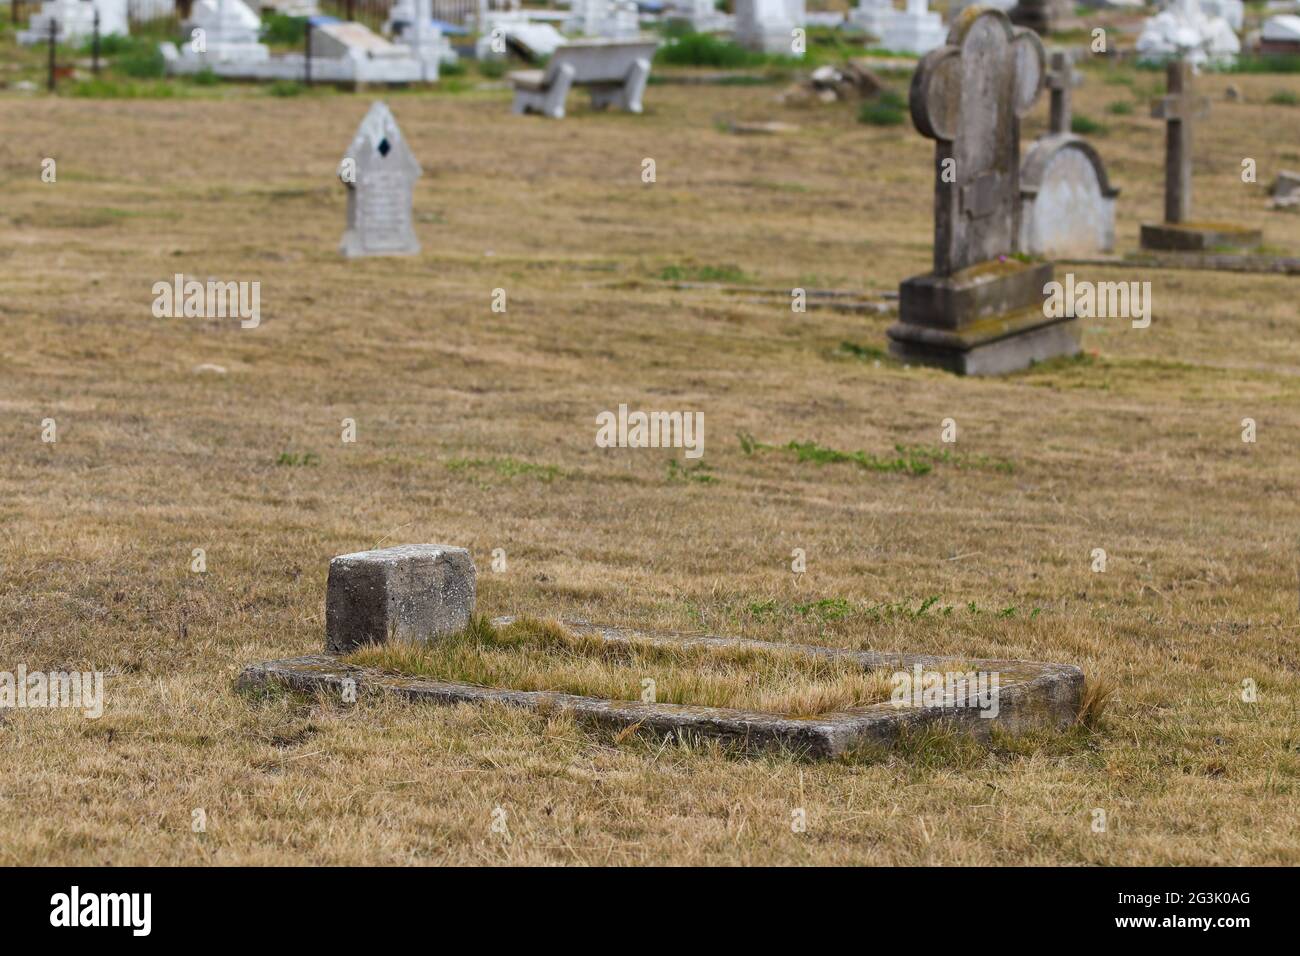 Forgotten Child's Grave In An Old Graveyard Stock Photo